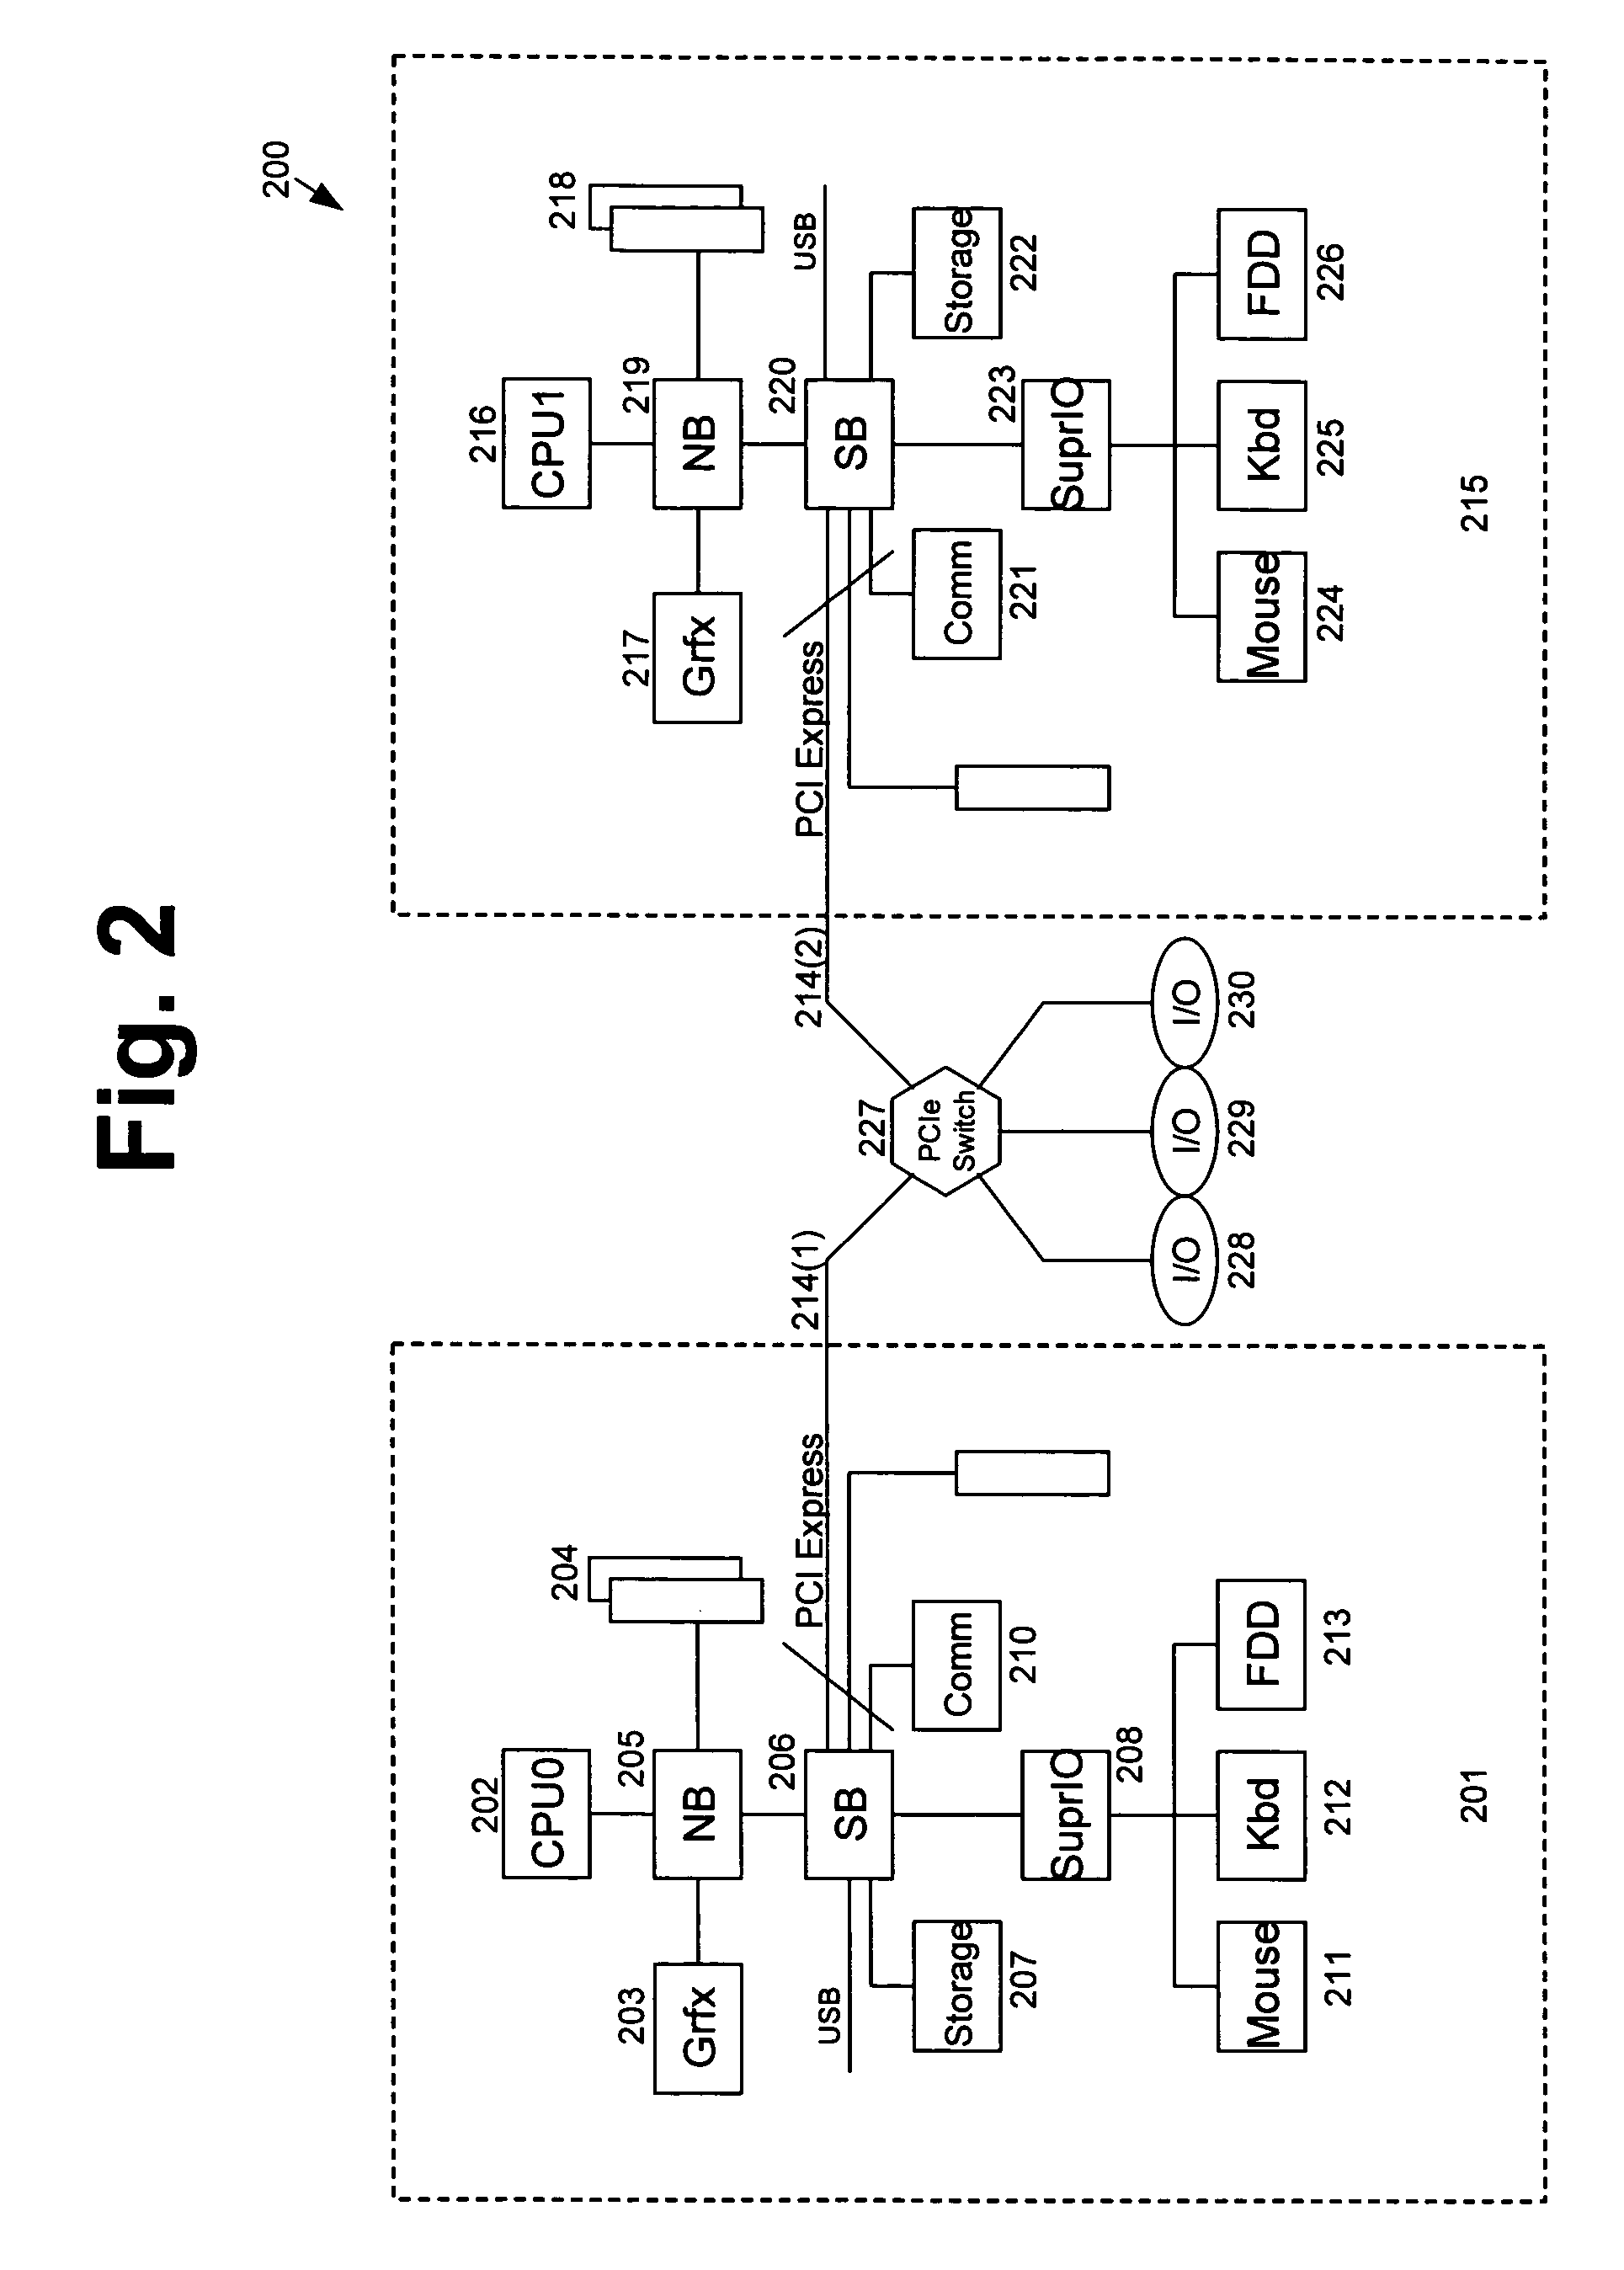 Configurable PCI express switch which allows multiple CPUs to be connected to multiple I/O devices